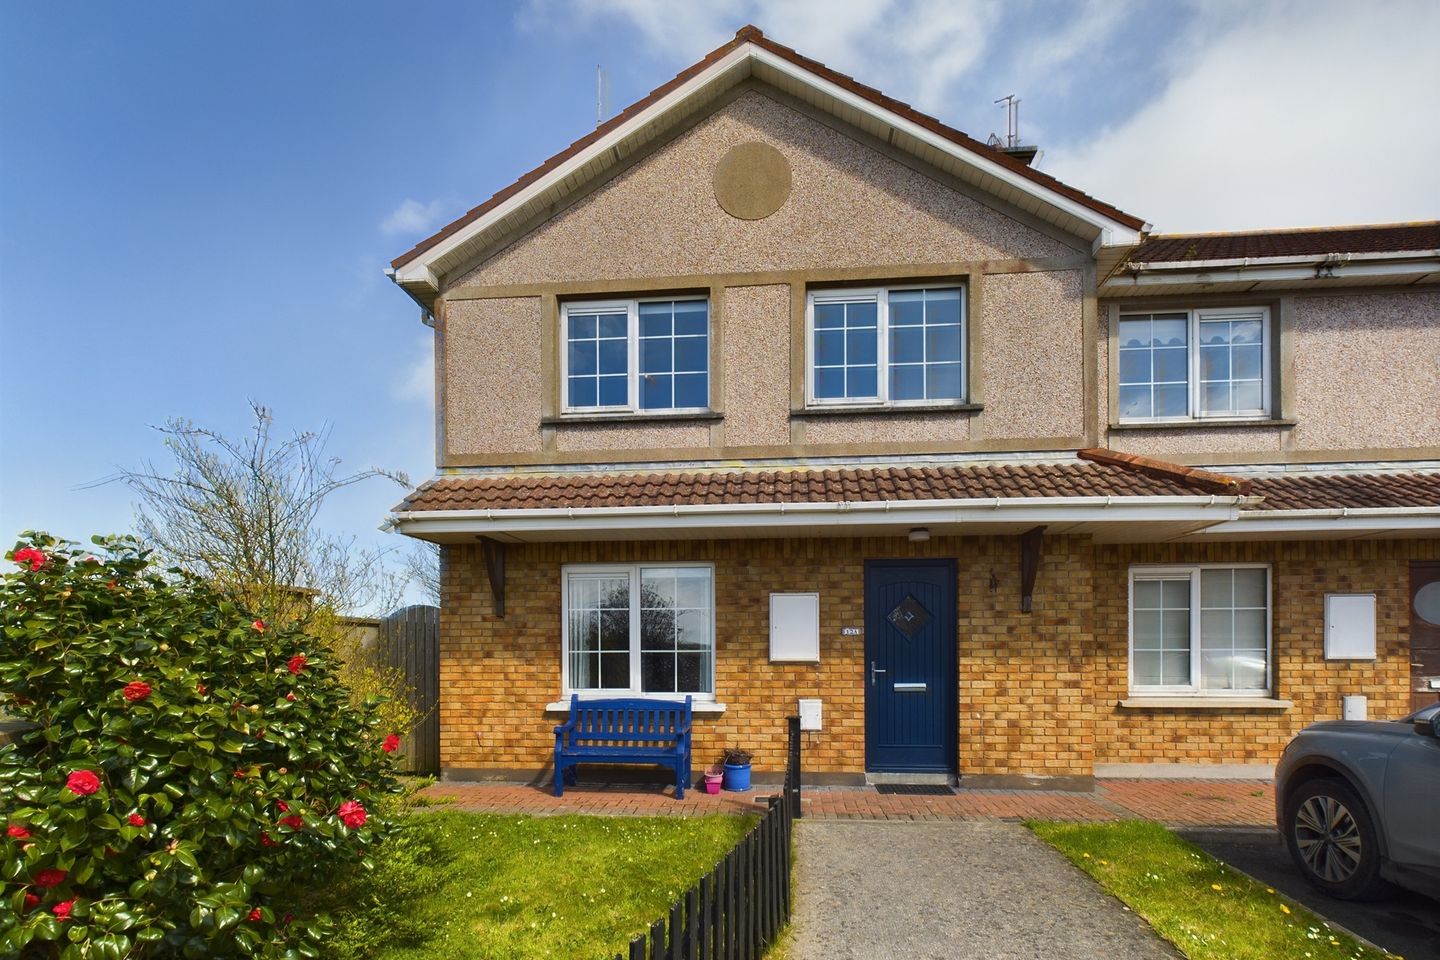 12A Cúil Beag, Tramore, Co. Waterford, X91W7Y0